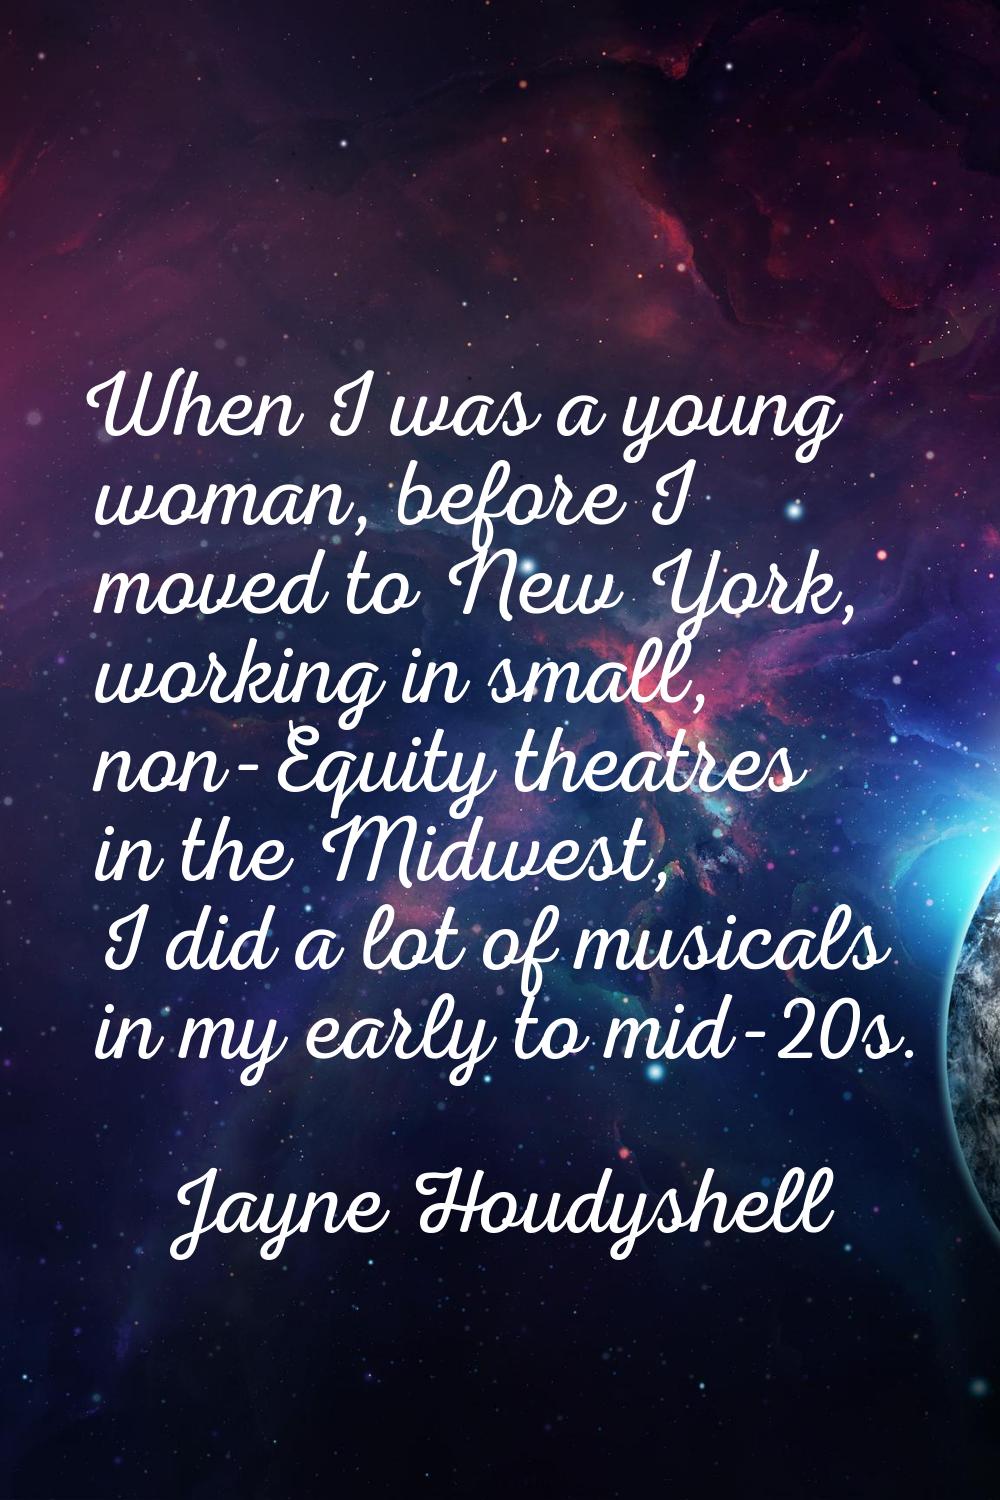 When I was a young woman, before I moved to New York, working in small, non-Equity theatres in the 